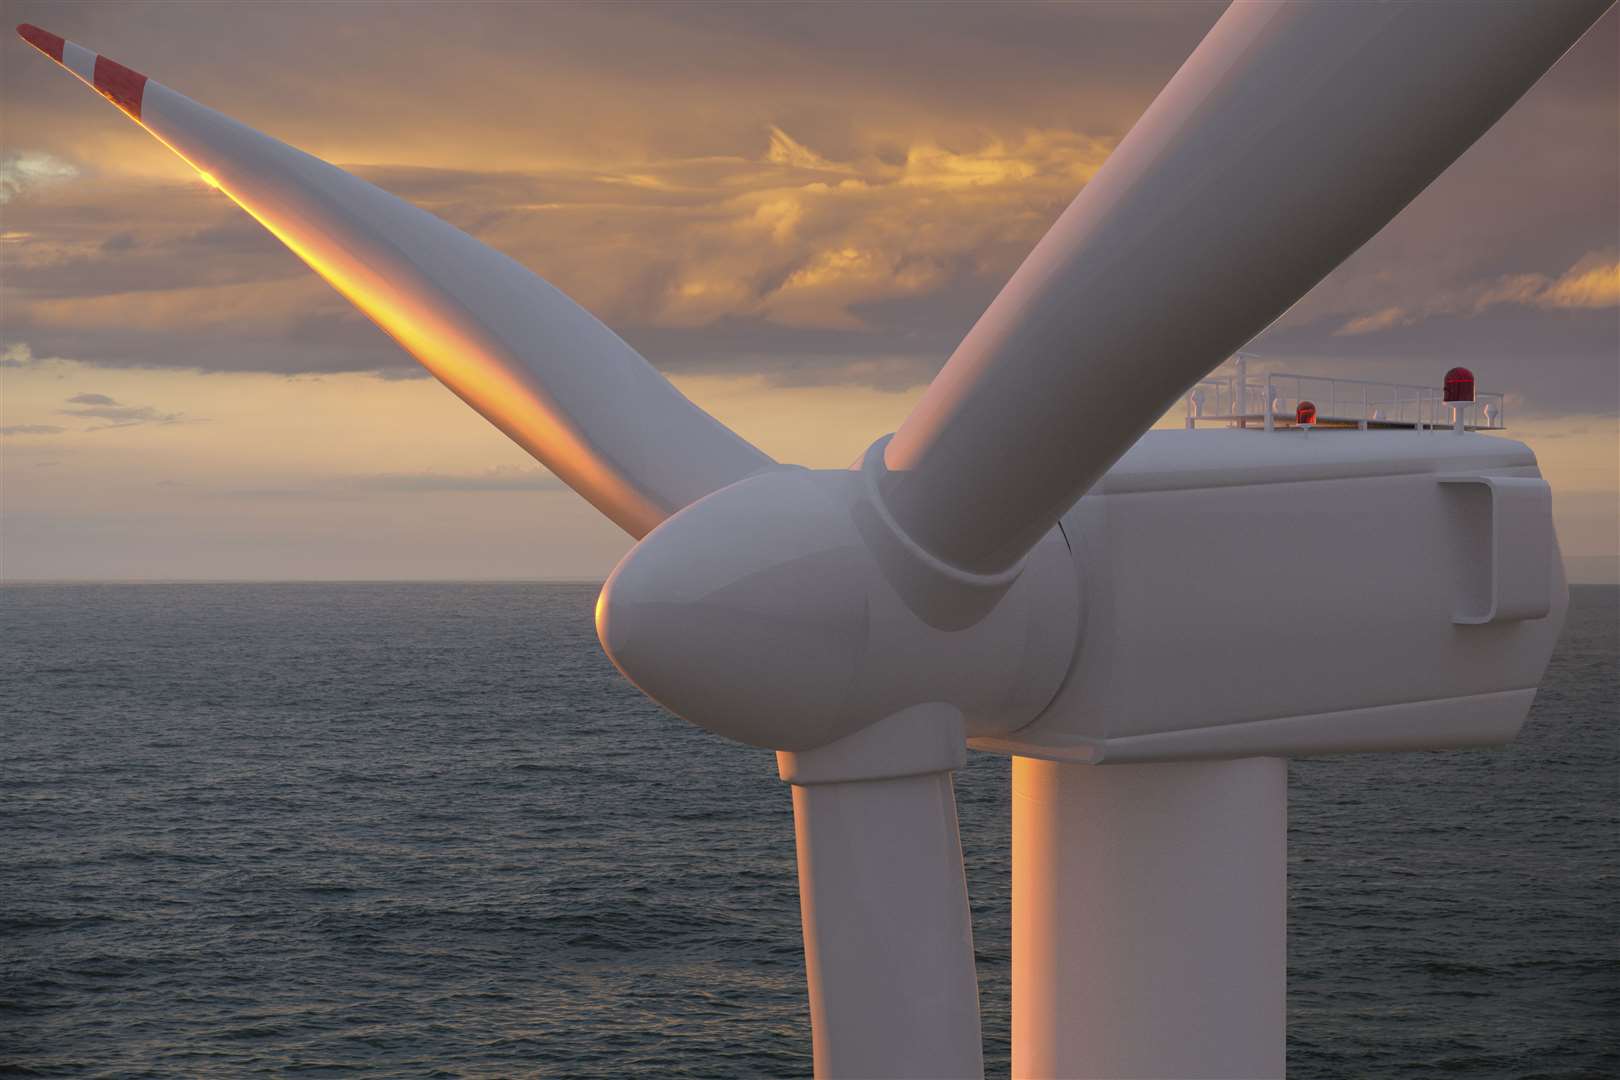 The Green Volt Offshore Wind Farm to be built off the coast of Peterhead has been approved.